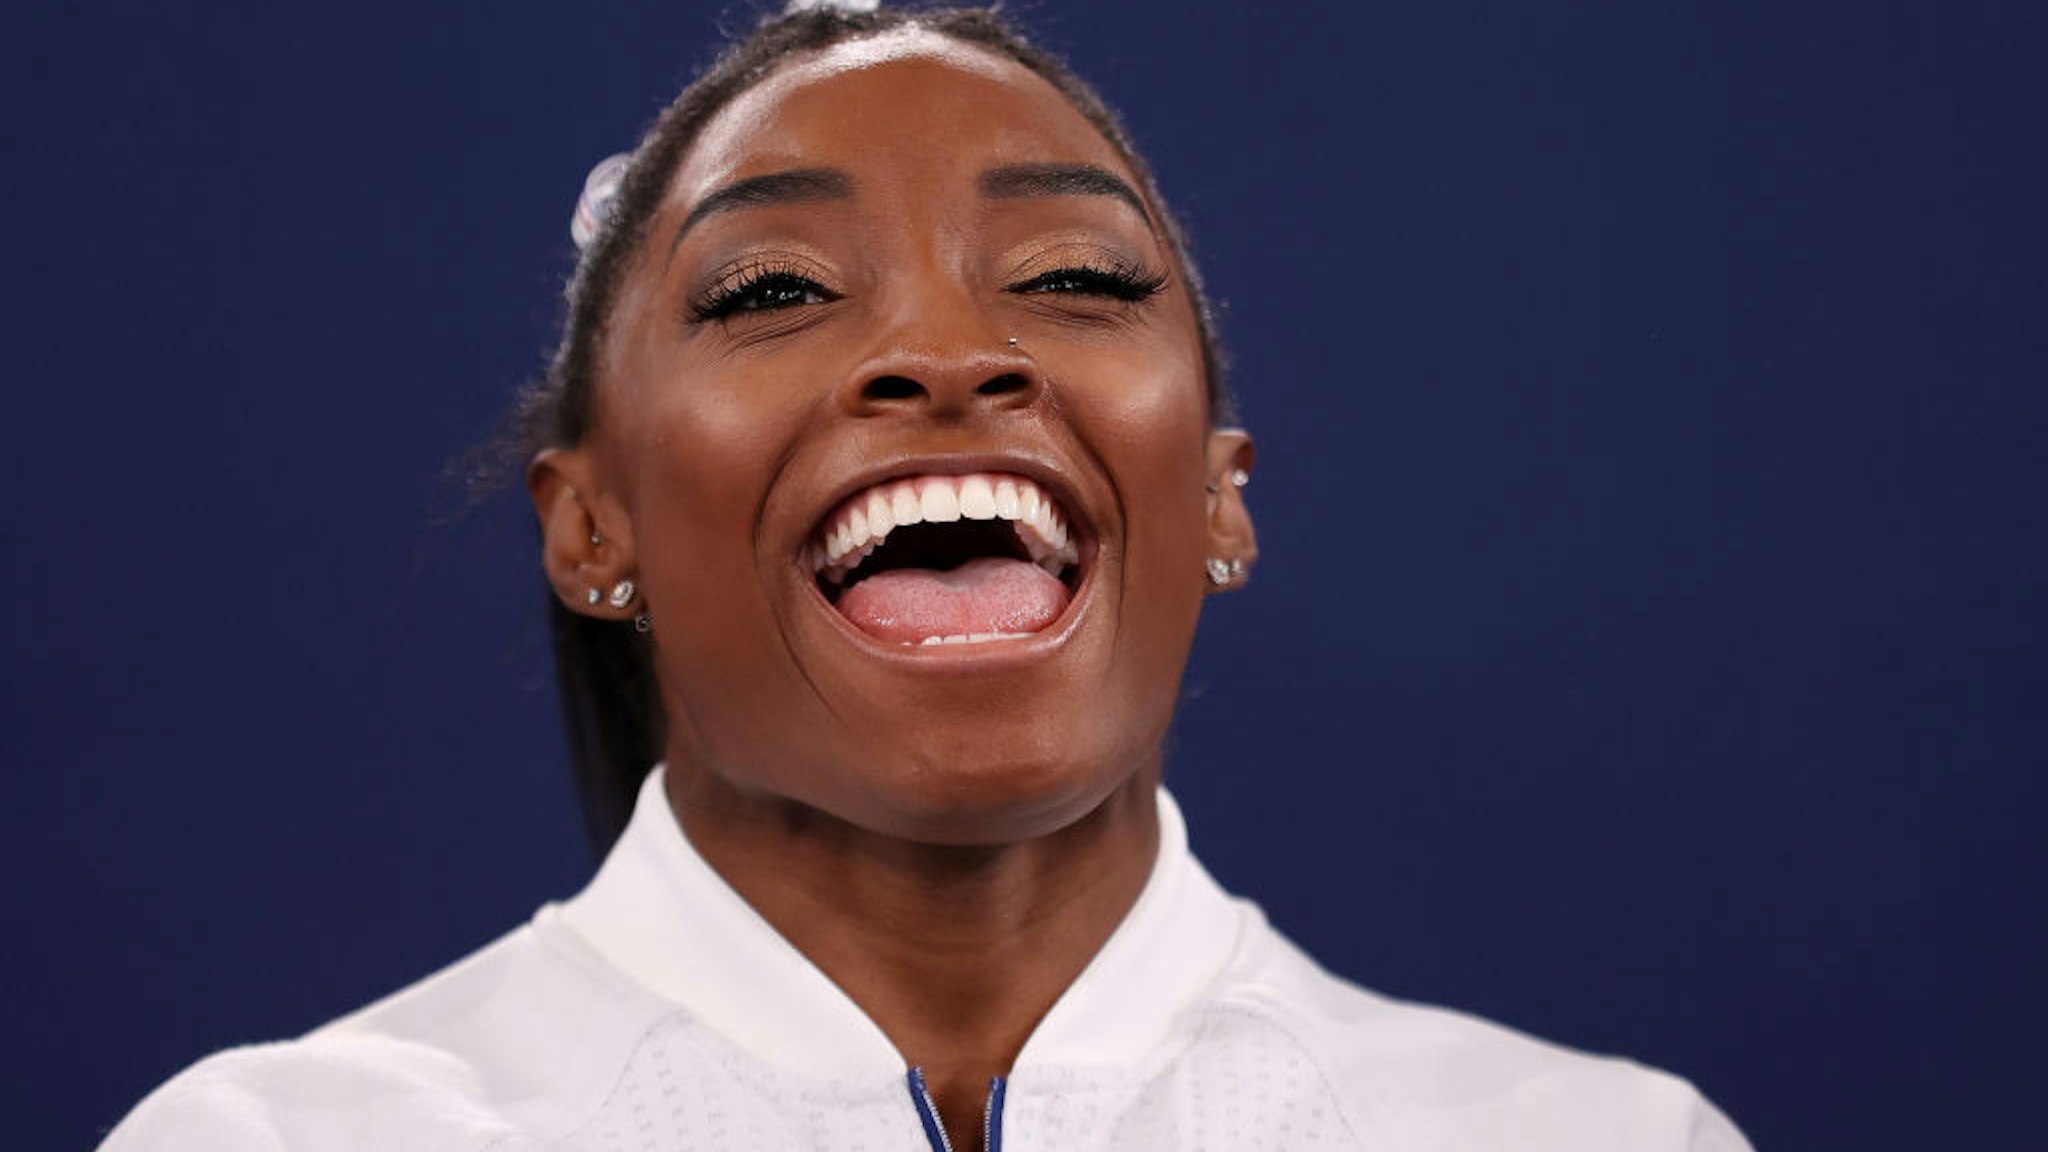 Simone Biles of Team United States reacts during the Women's Team Final on day four of the Tokyo 2020 Olympic Games at Ariake Gymnastics Centre on July 27, 2021 in Tokyo, Japan.